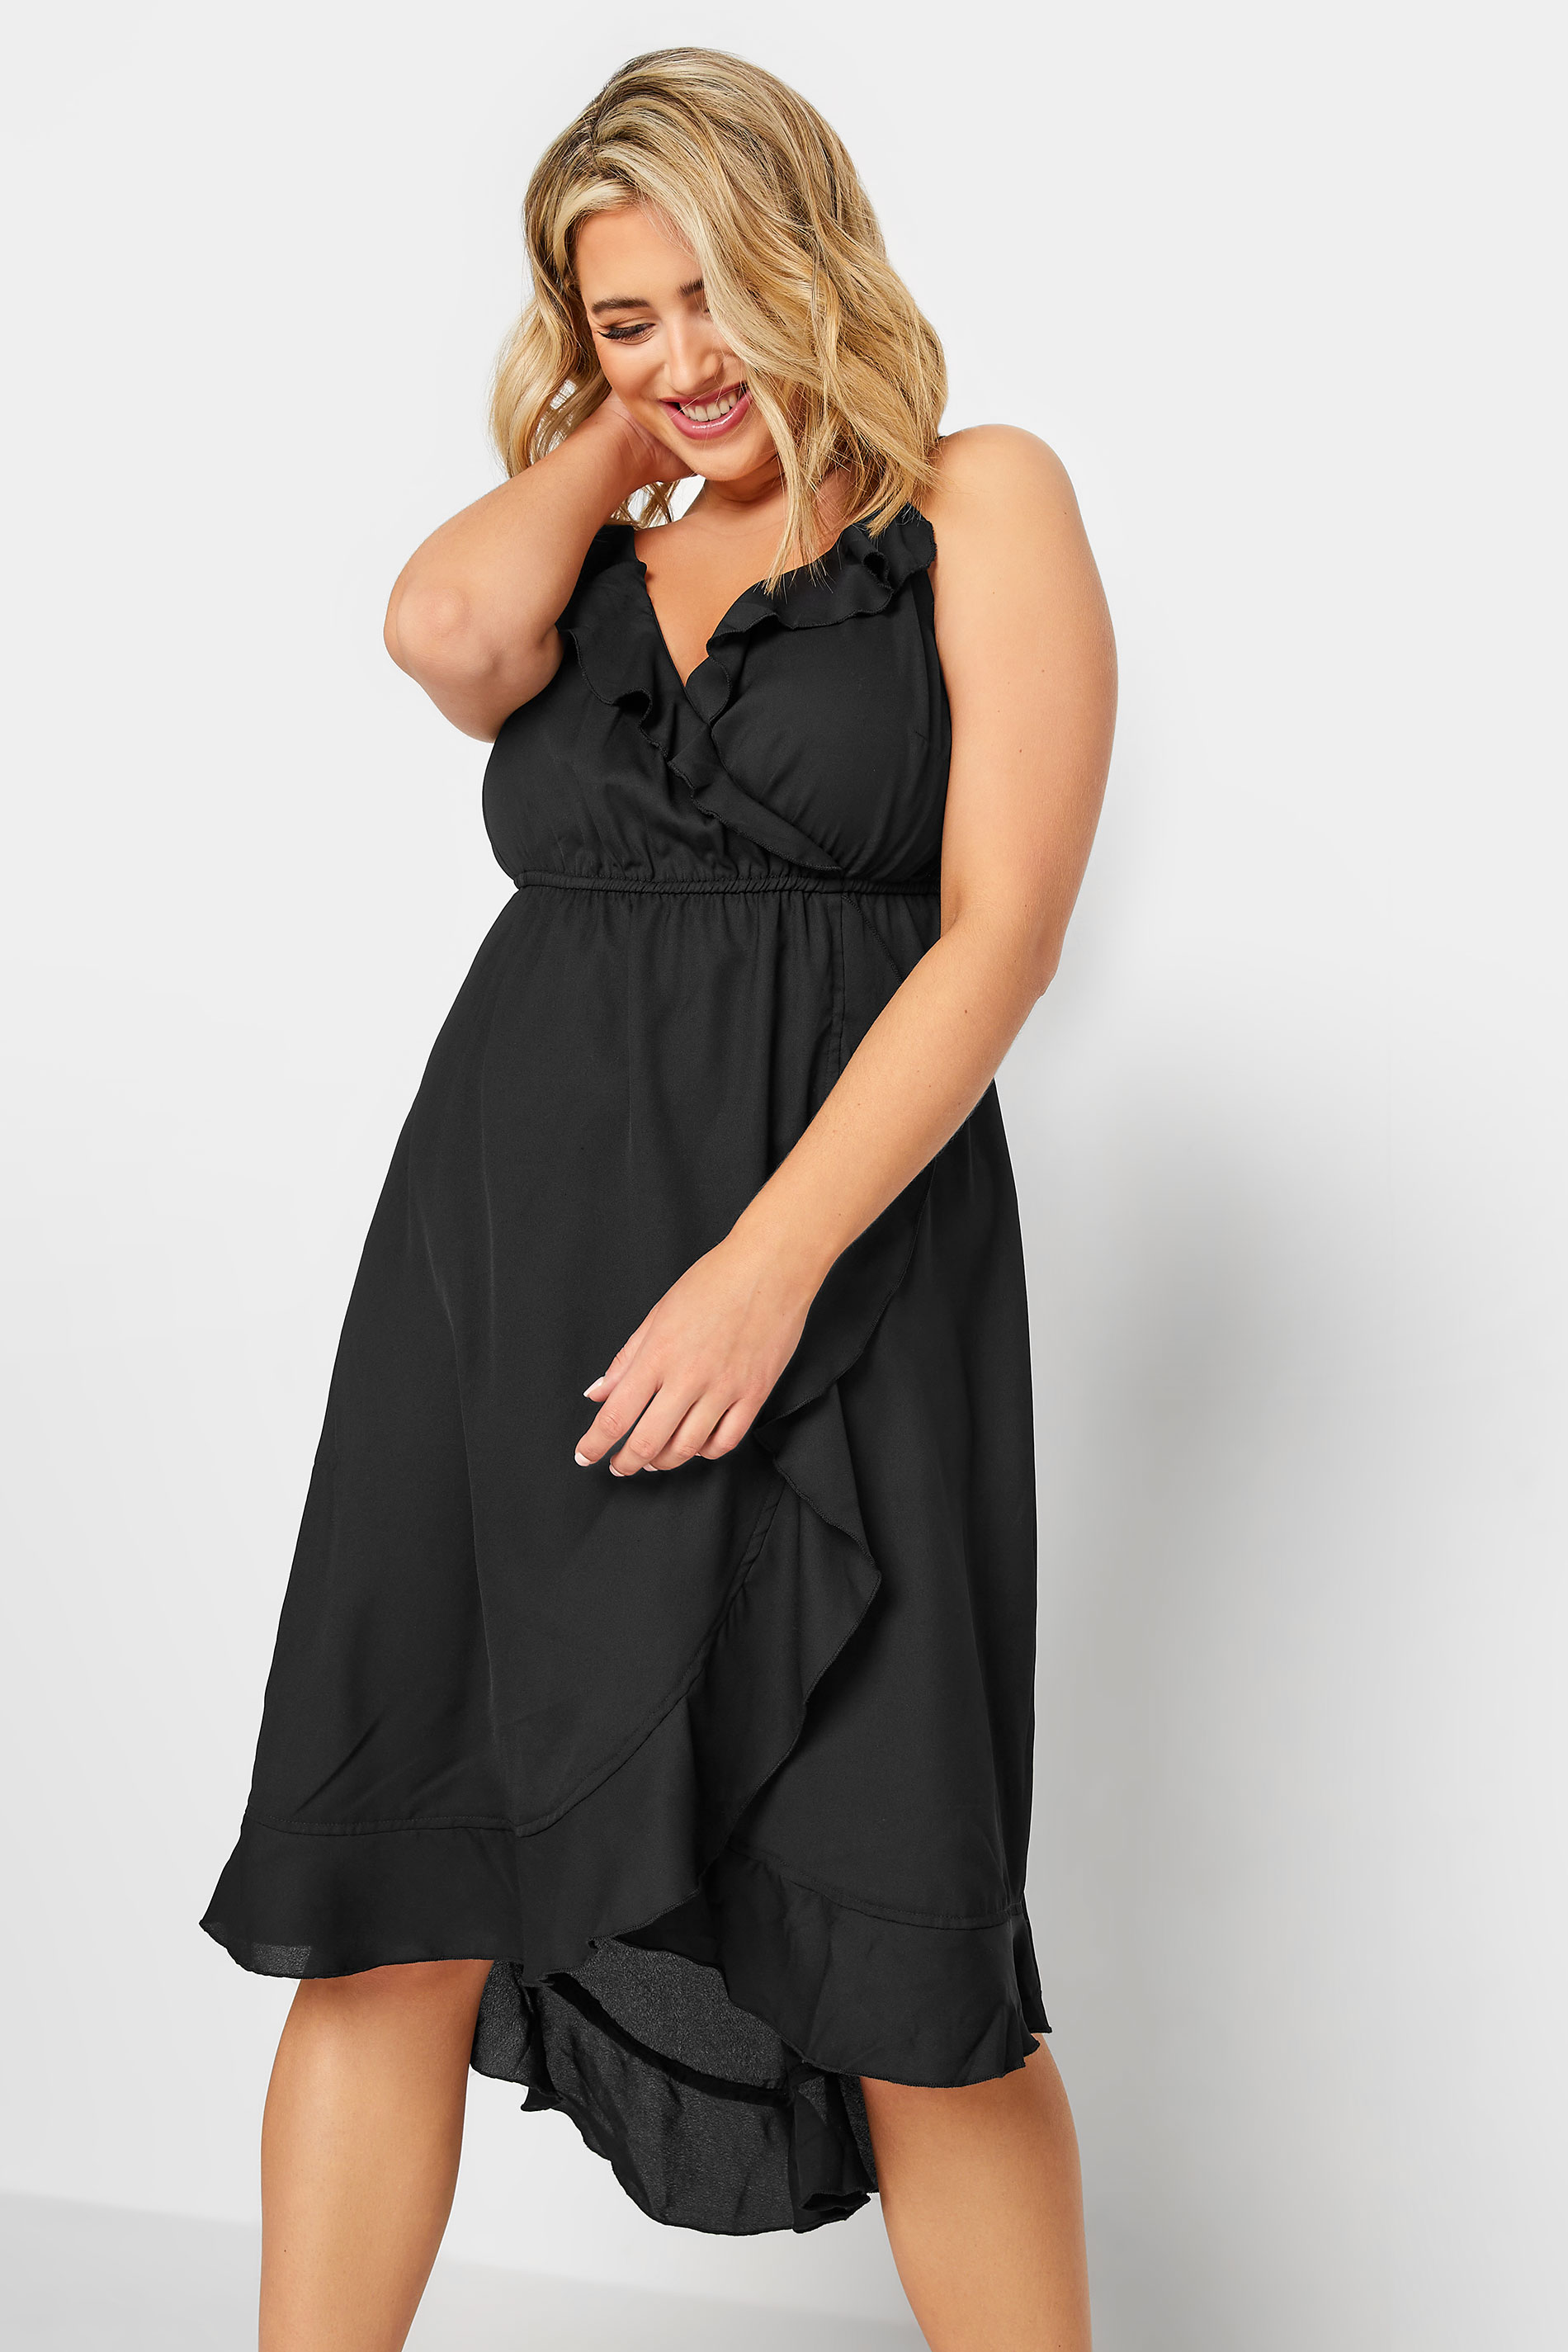 LIMITED COLLECTION Plus Size Black Frill Midaxi Wrap Dress | Yours Clothing  2